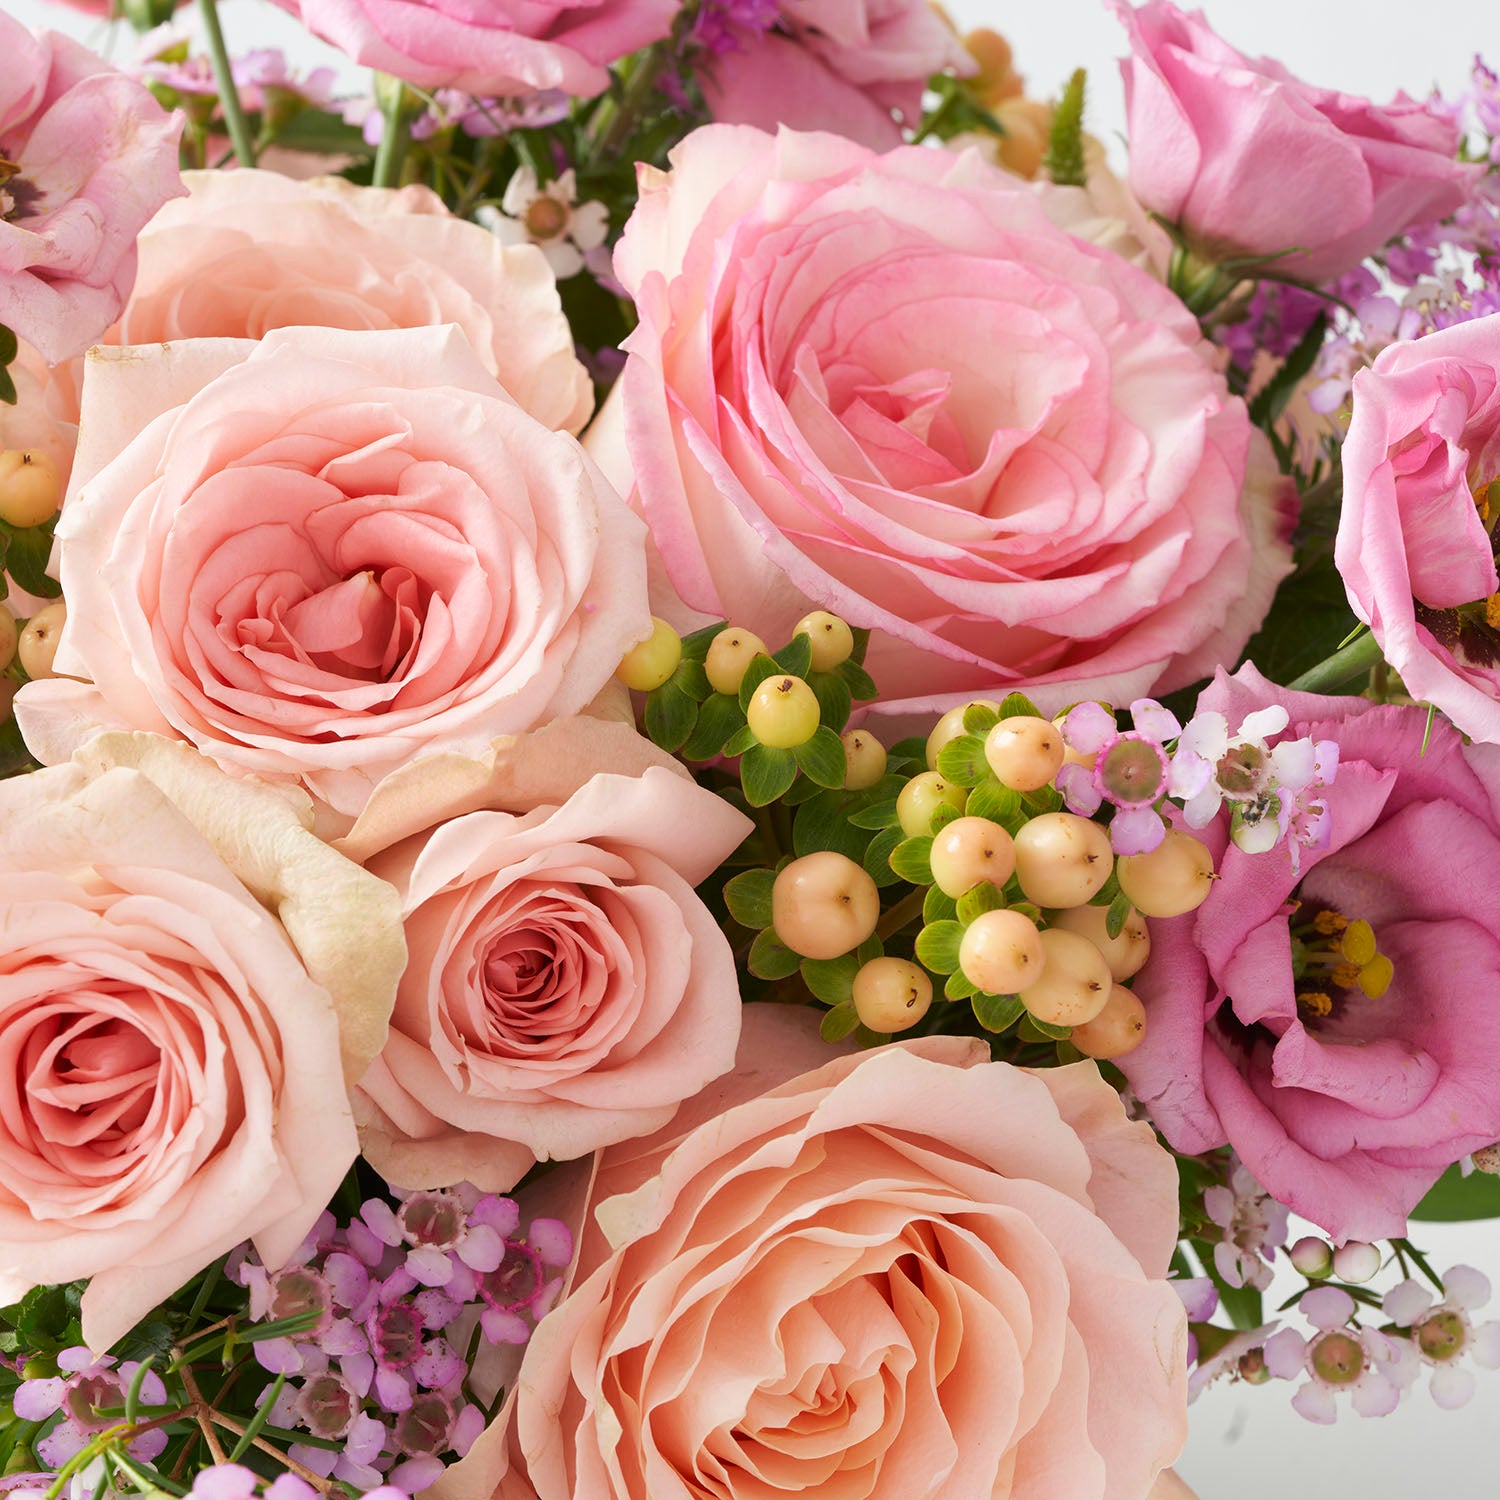  Soft peachy roses, pink wax flower, pink lisianthus and peach hypericum berries.